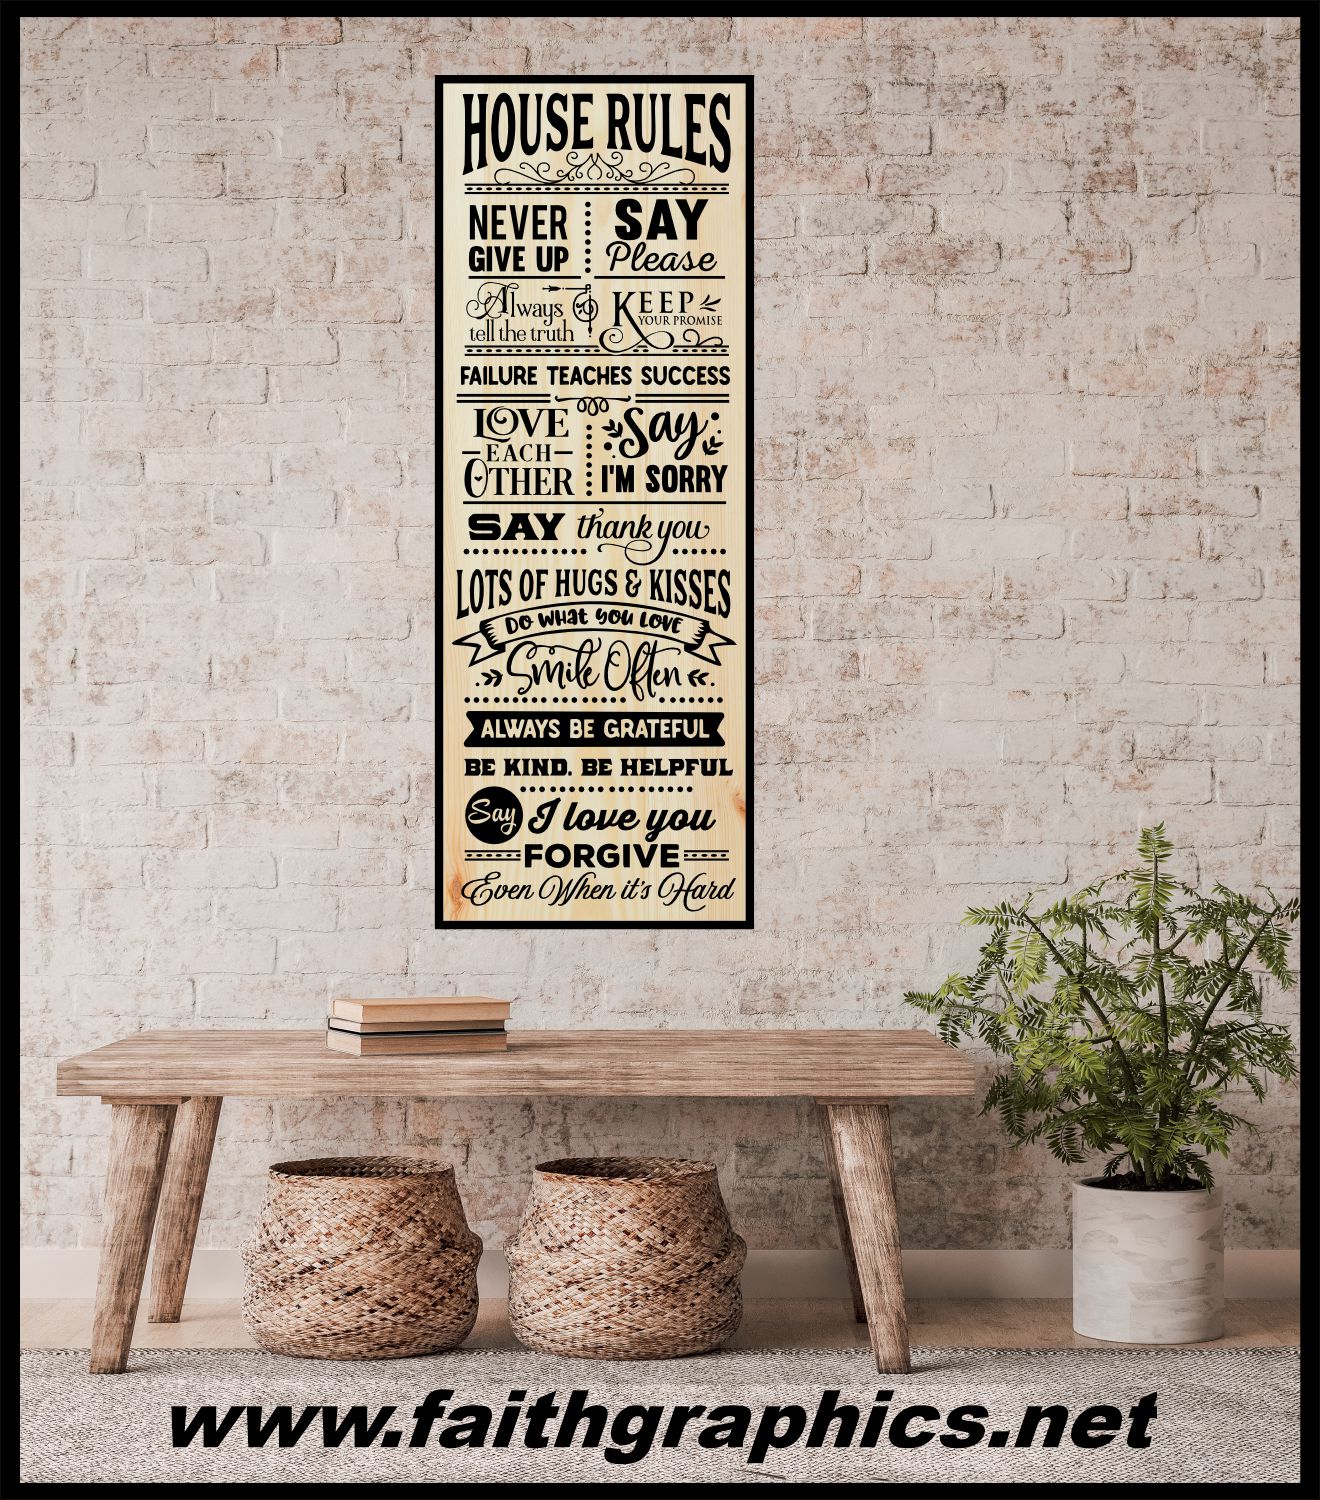 House Rules Forgive Tall Engraved 30" x 11" Sign